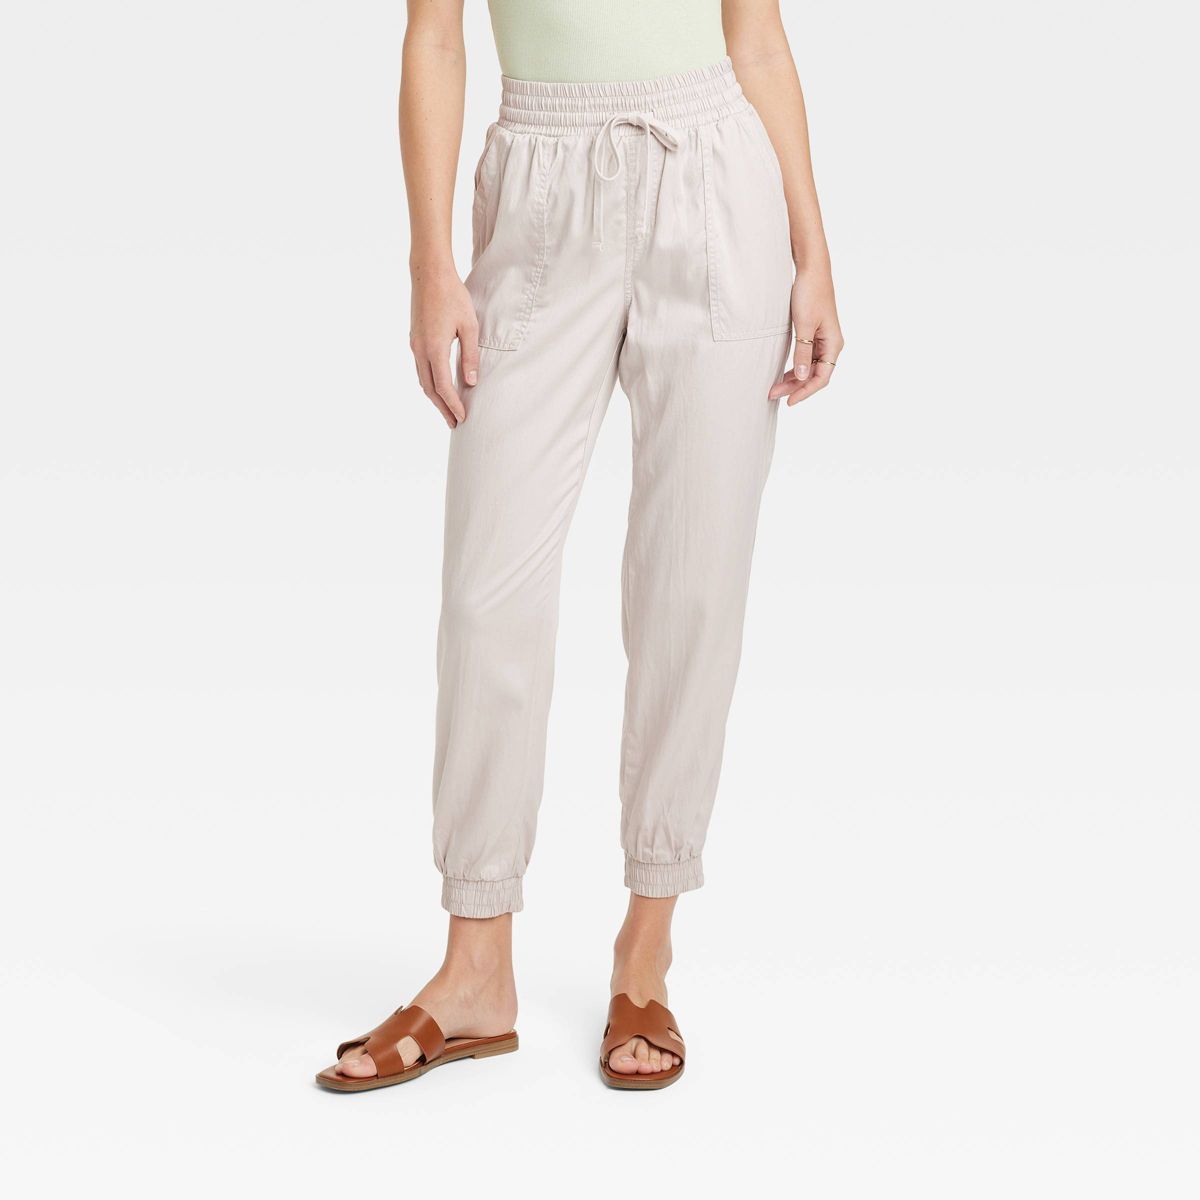 Women's High-Rise Modern Ankle Jogger Pants - A New Day™ Tan S | Target